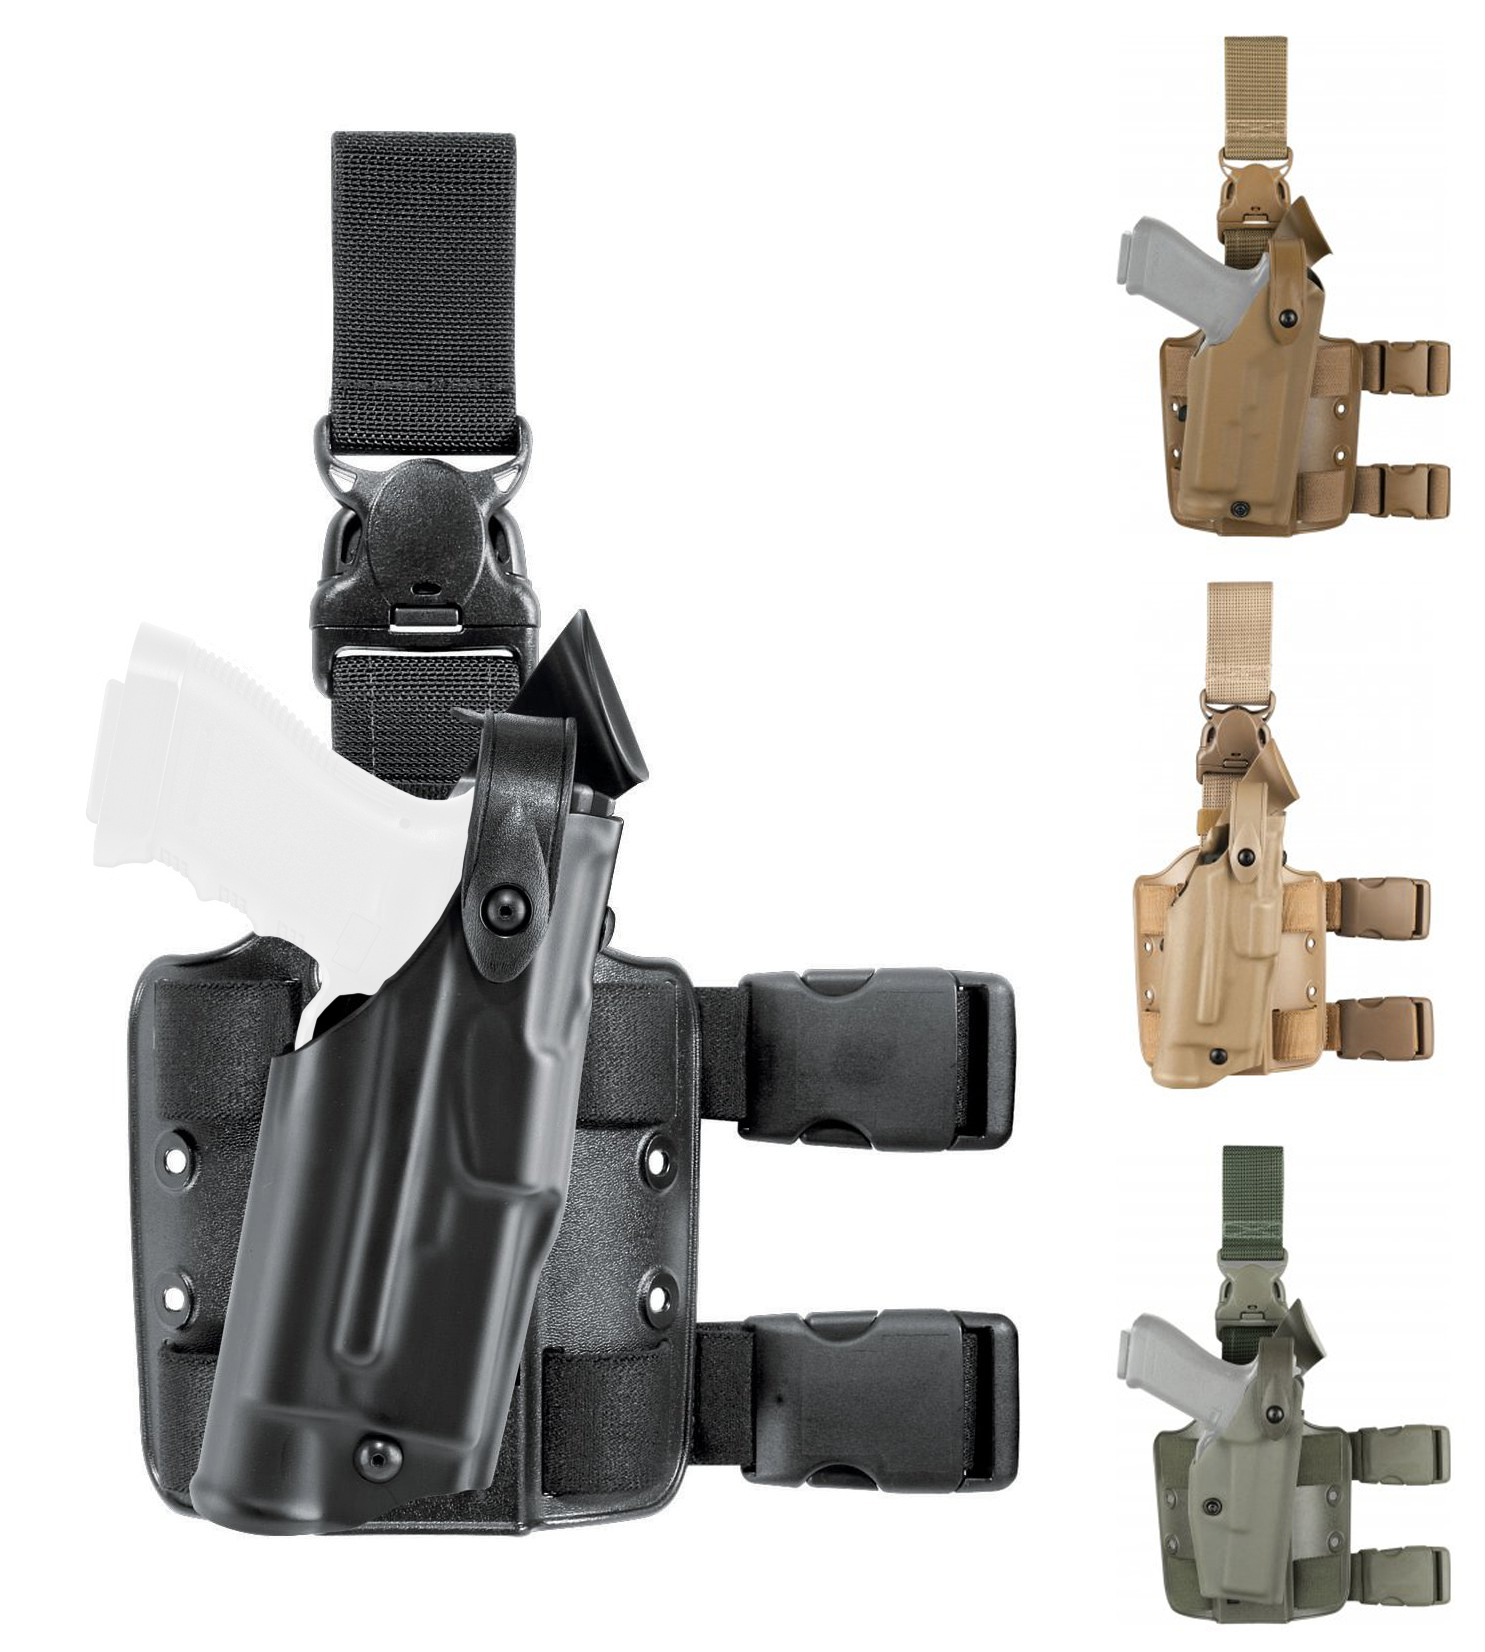 Safariland 6390 RDS ALS Mid-Ride Level I Retention Duty Holster for SIG  P320 M17 with SF X300 / M3 / TLR-1 / APL Flashlight ( RMR / Docter Optic )